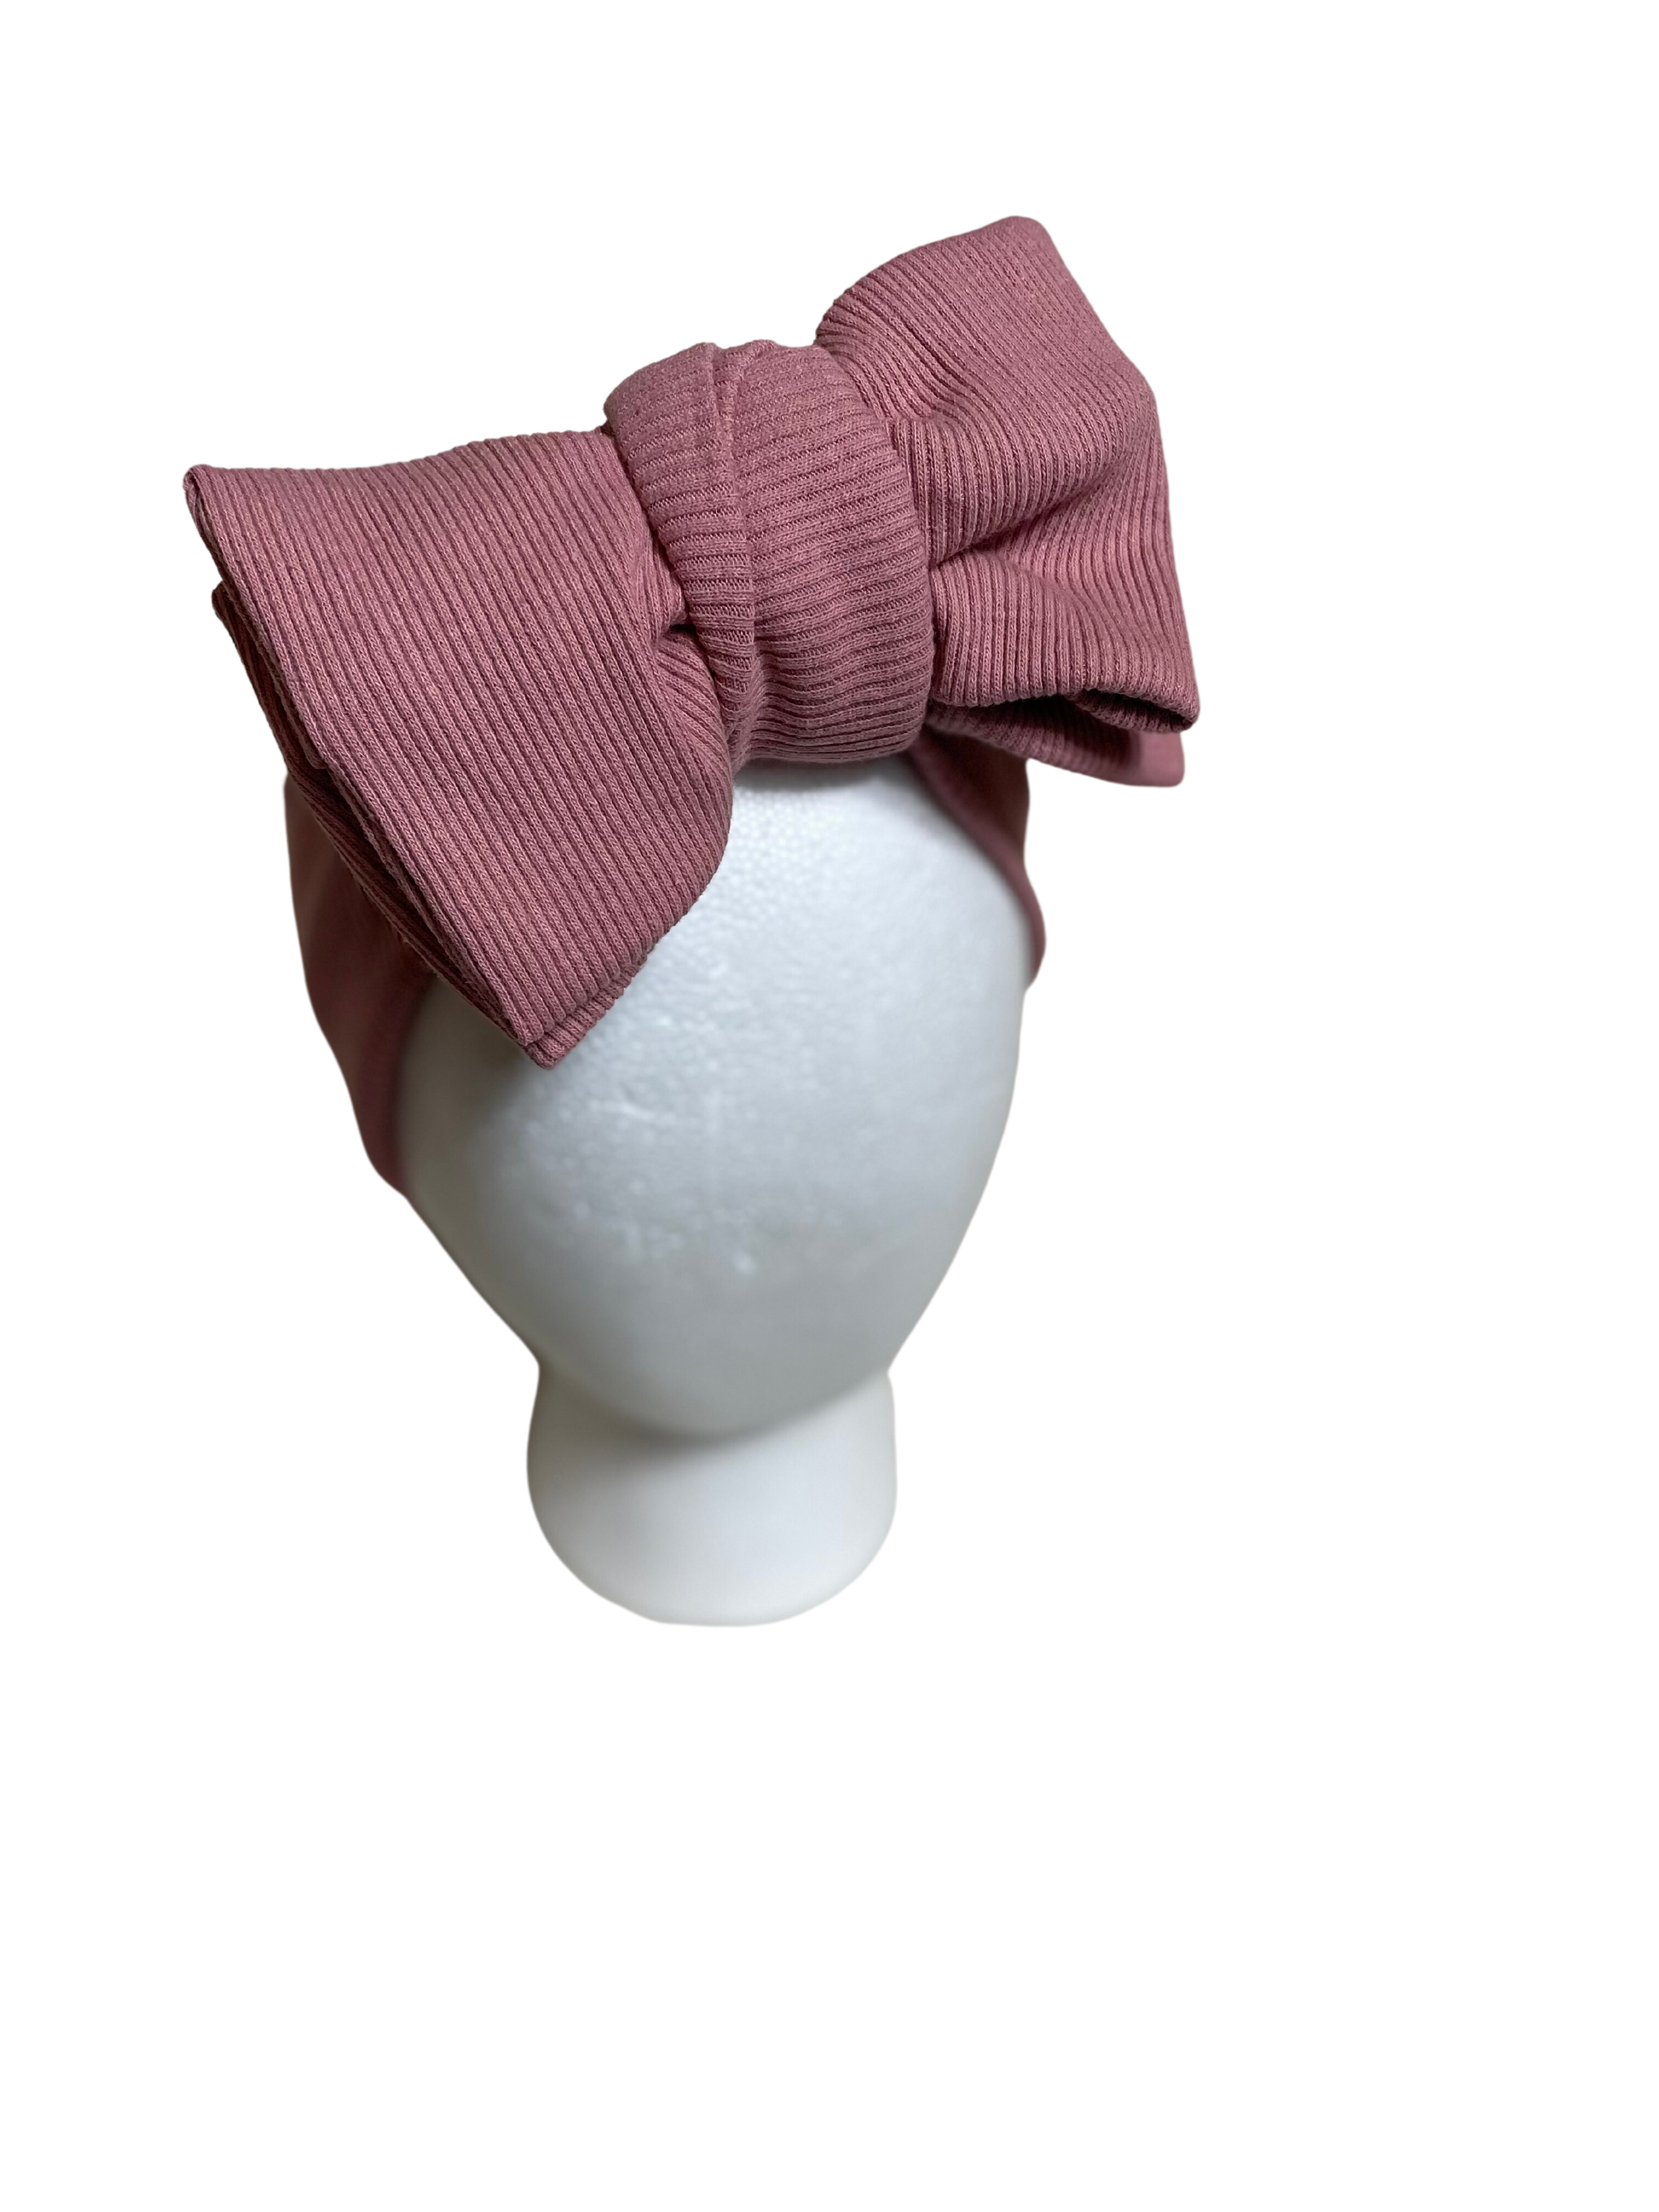 Oversized Headwrap - Raspberry - Ev's Bowtique Shop Oversized headwraps are made to grow with your babies from newborn, infant to toddler as they are re-tieable/adjustable! Being made from soft stretchy fabric makes them the perfect essential for everyday wear or to make a statement✨ As always handle with care, your bows are delicate items!